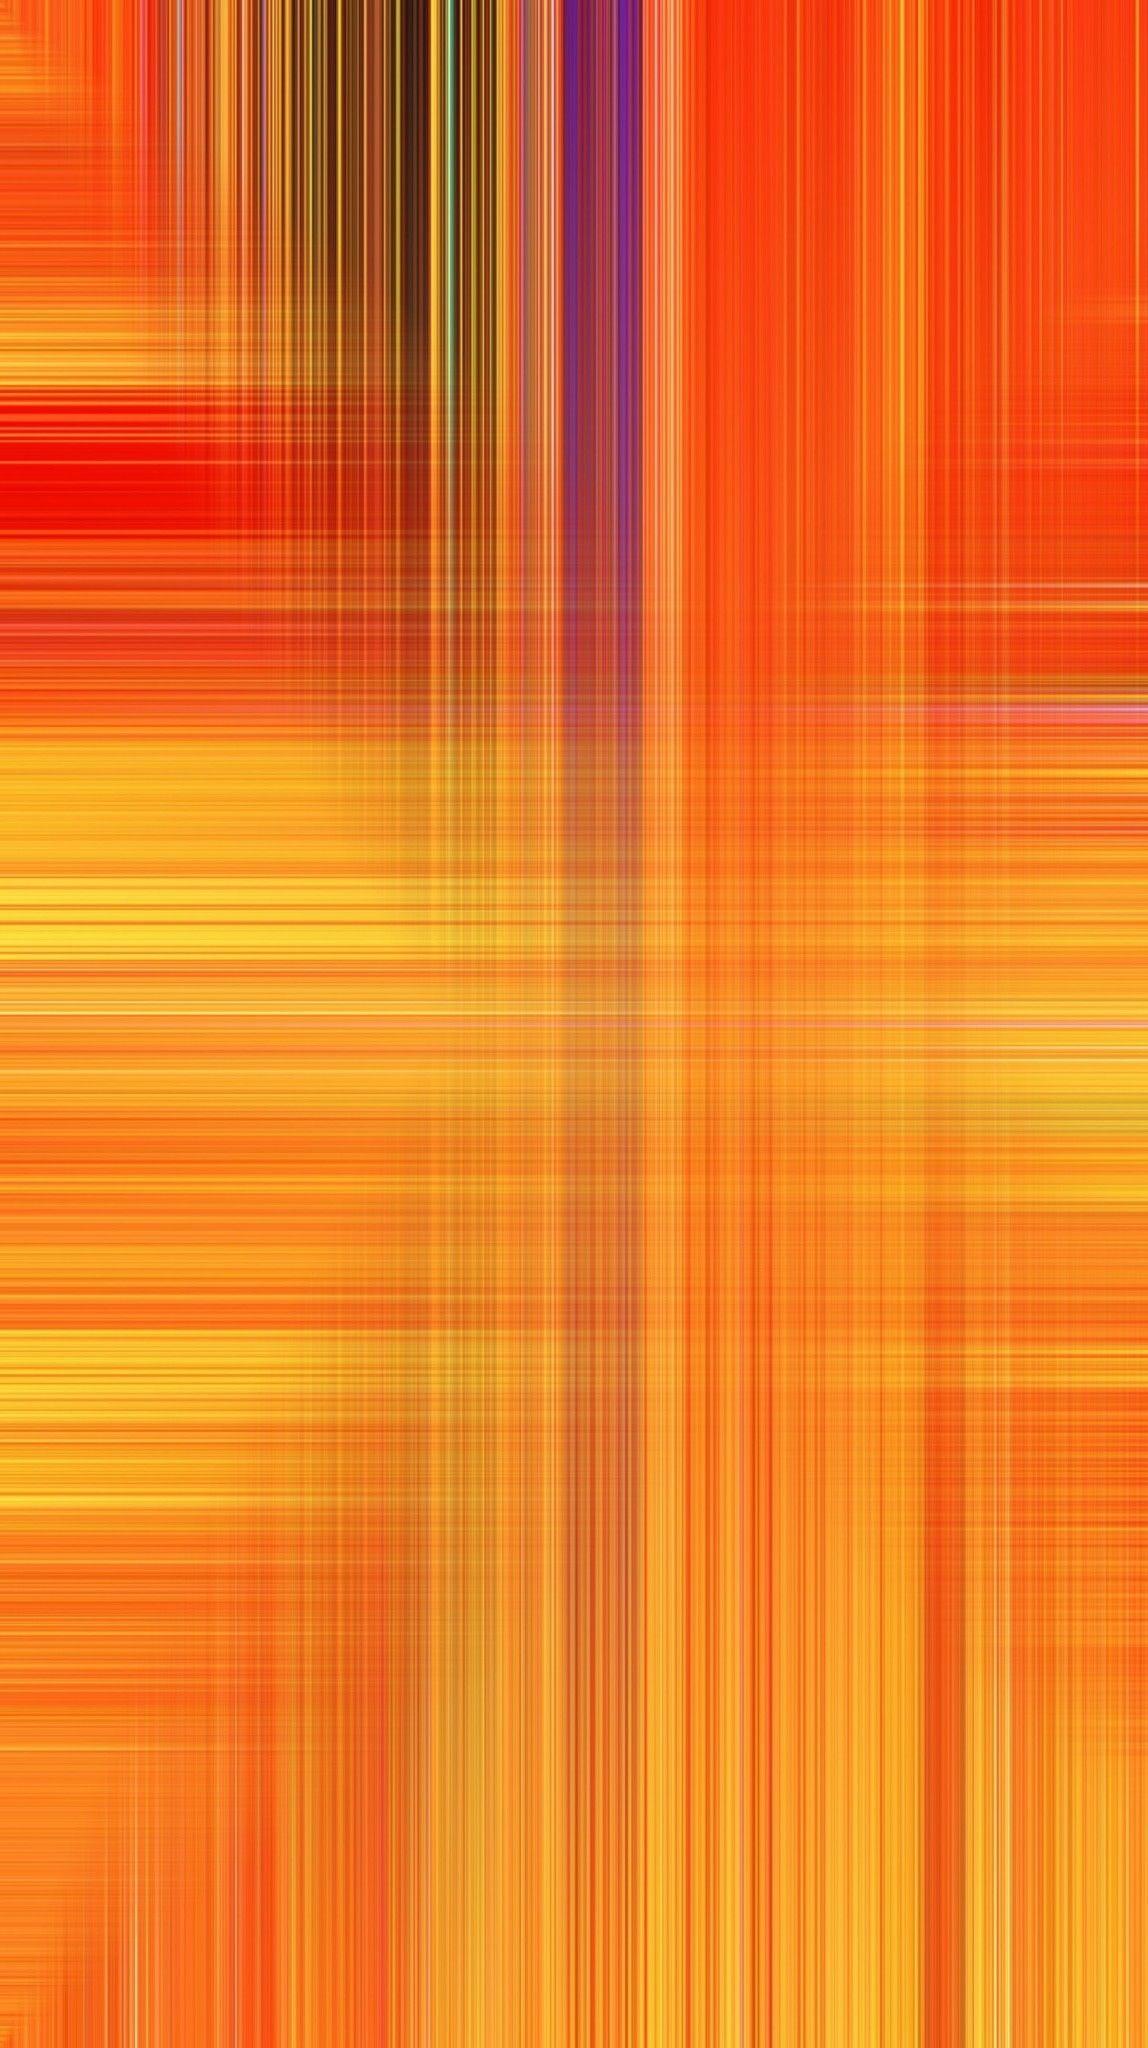 Red Orange Yellow Crosspatch Wallpaper. *Abstract and Geometric